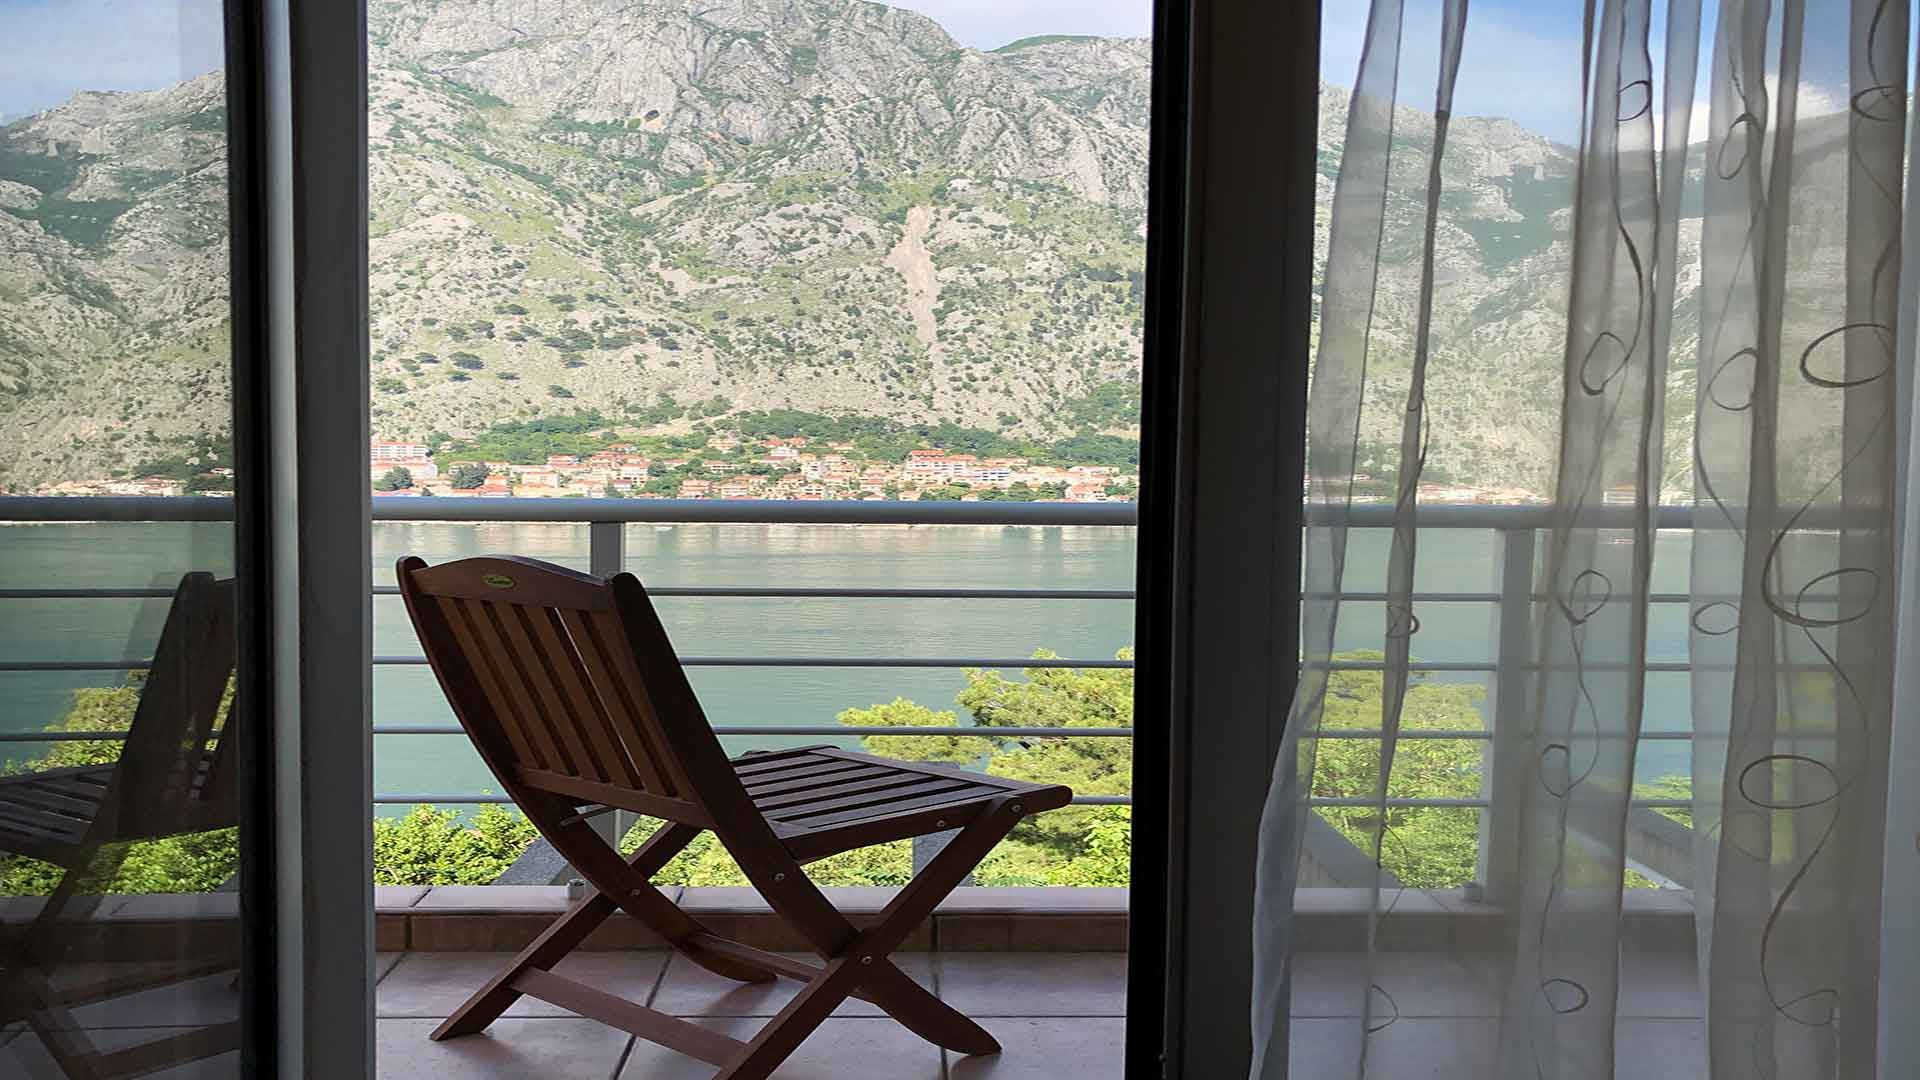 Apartment-for-sale-Muo-Kotor-14-1